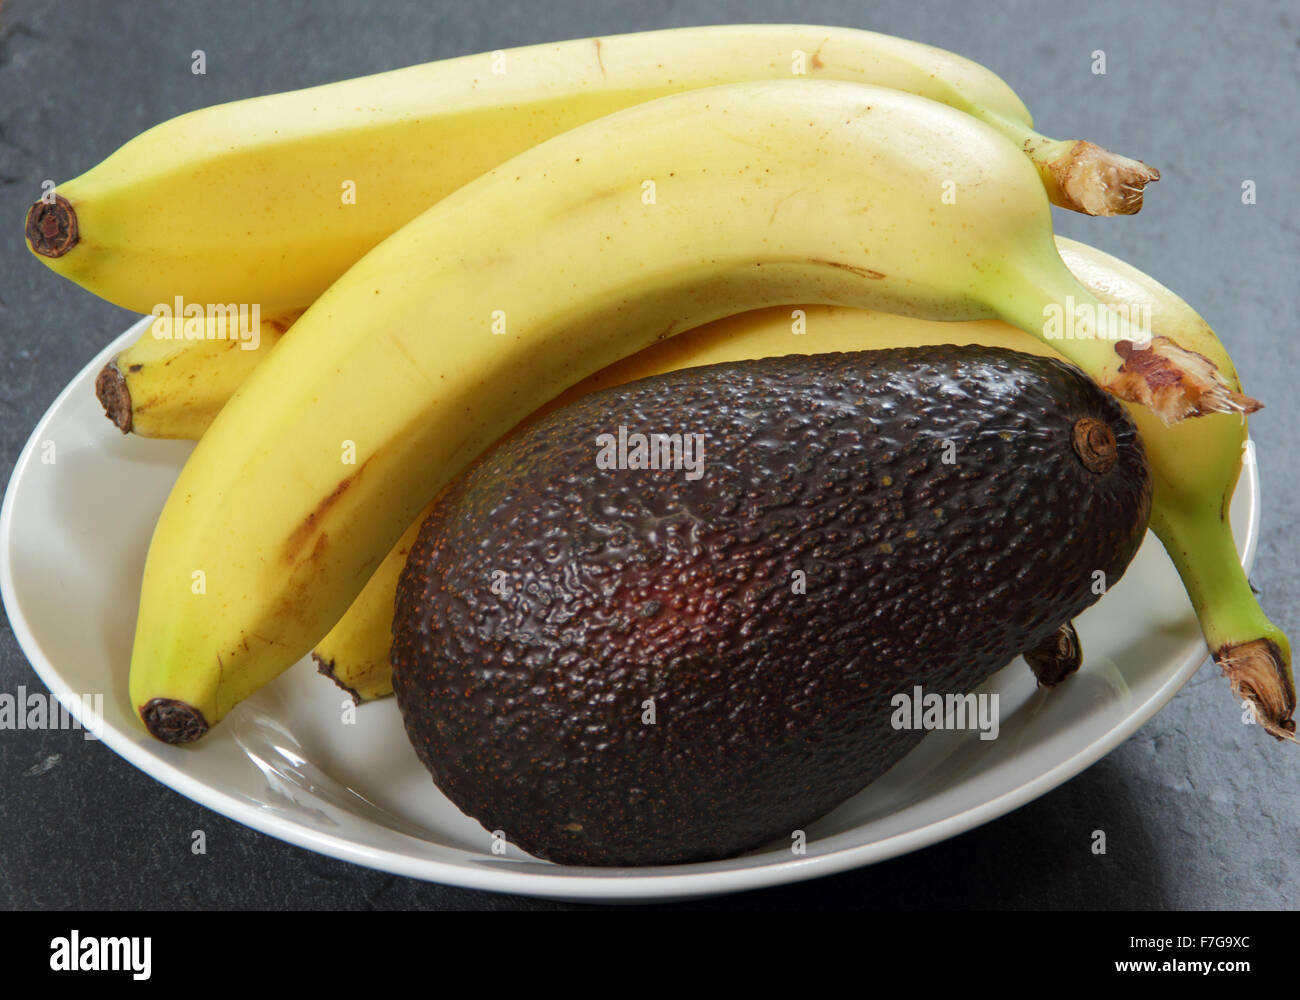 Bananas in a bowl with an avocado to hasten the ripening process - domestic setting , UK Stock Photo